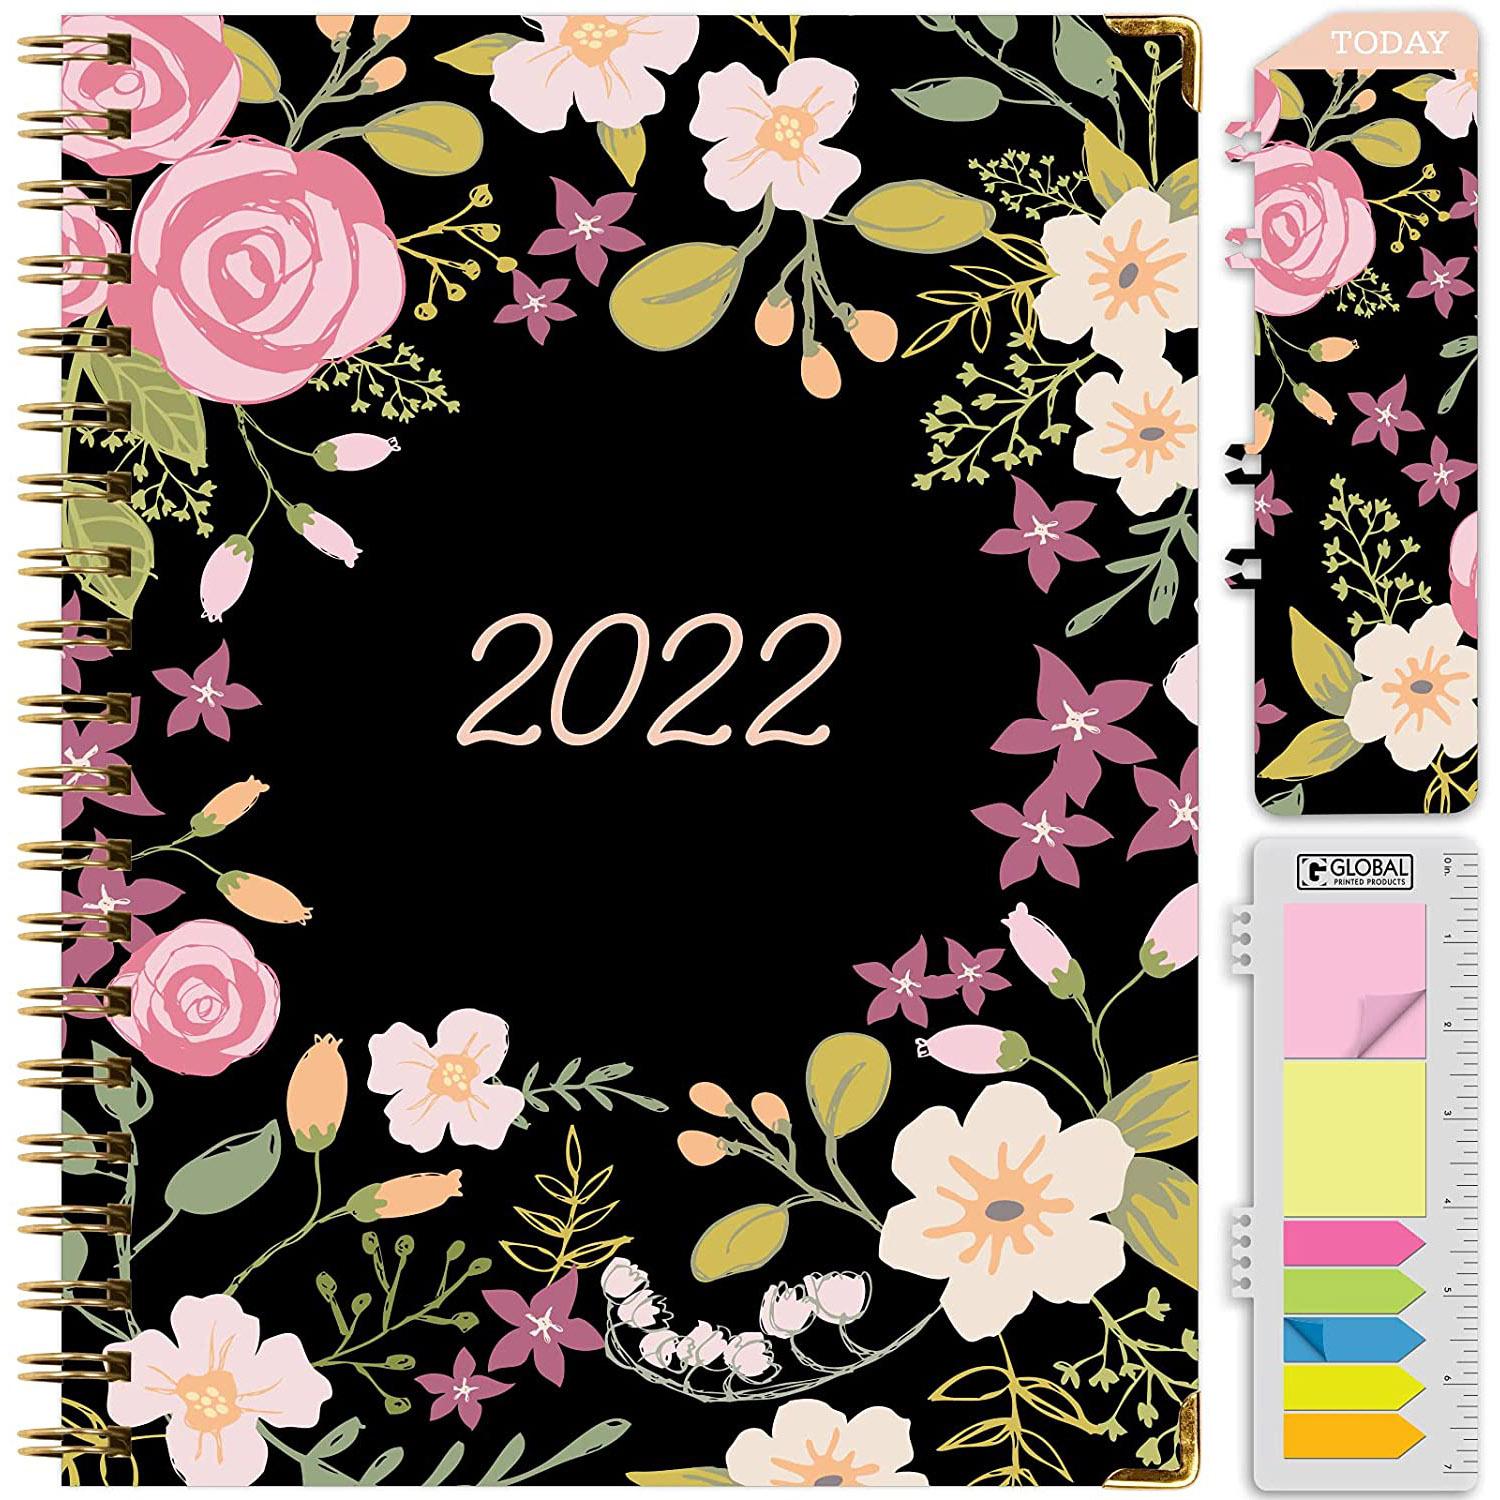 Hardcover 2022 Planner Yearly Agenda Book for $13.77